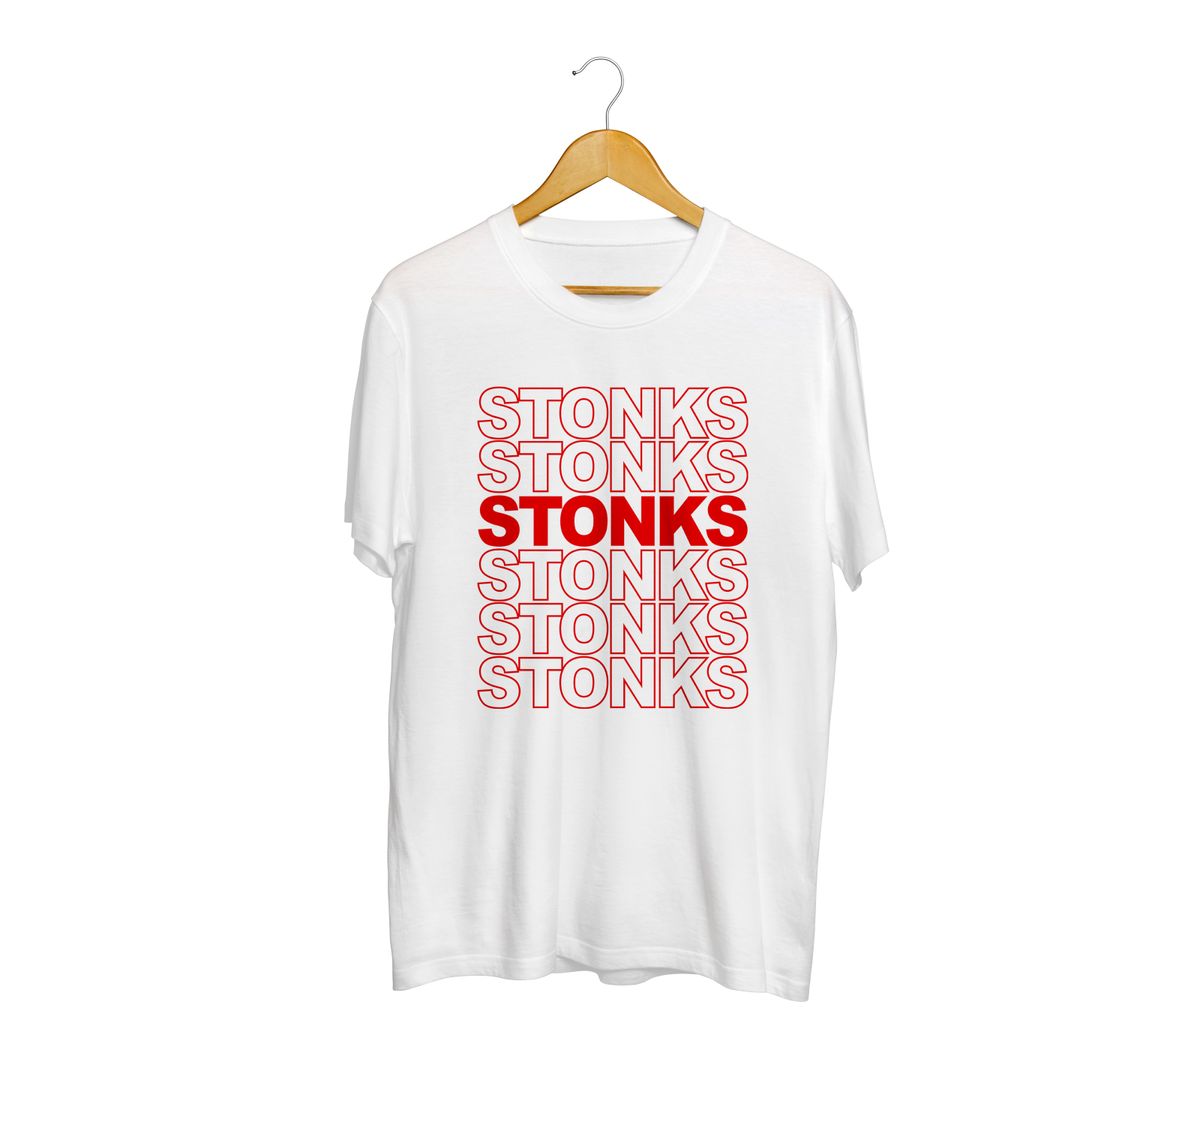 Fan Made Fits Stock White Stonks T-Shirt image 1